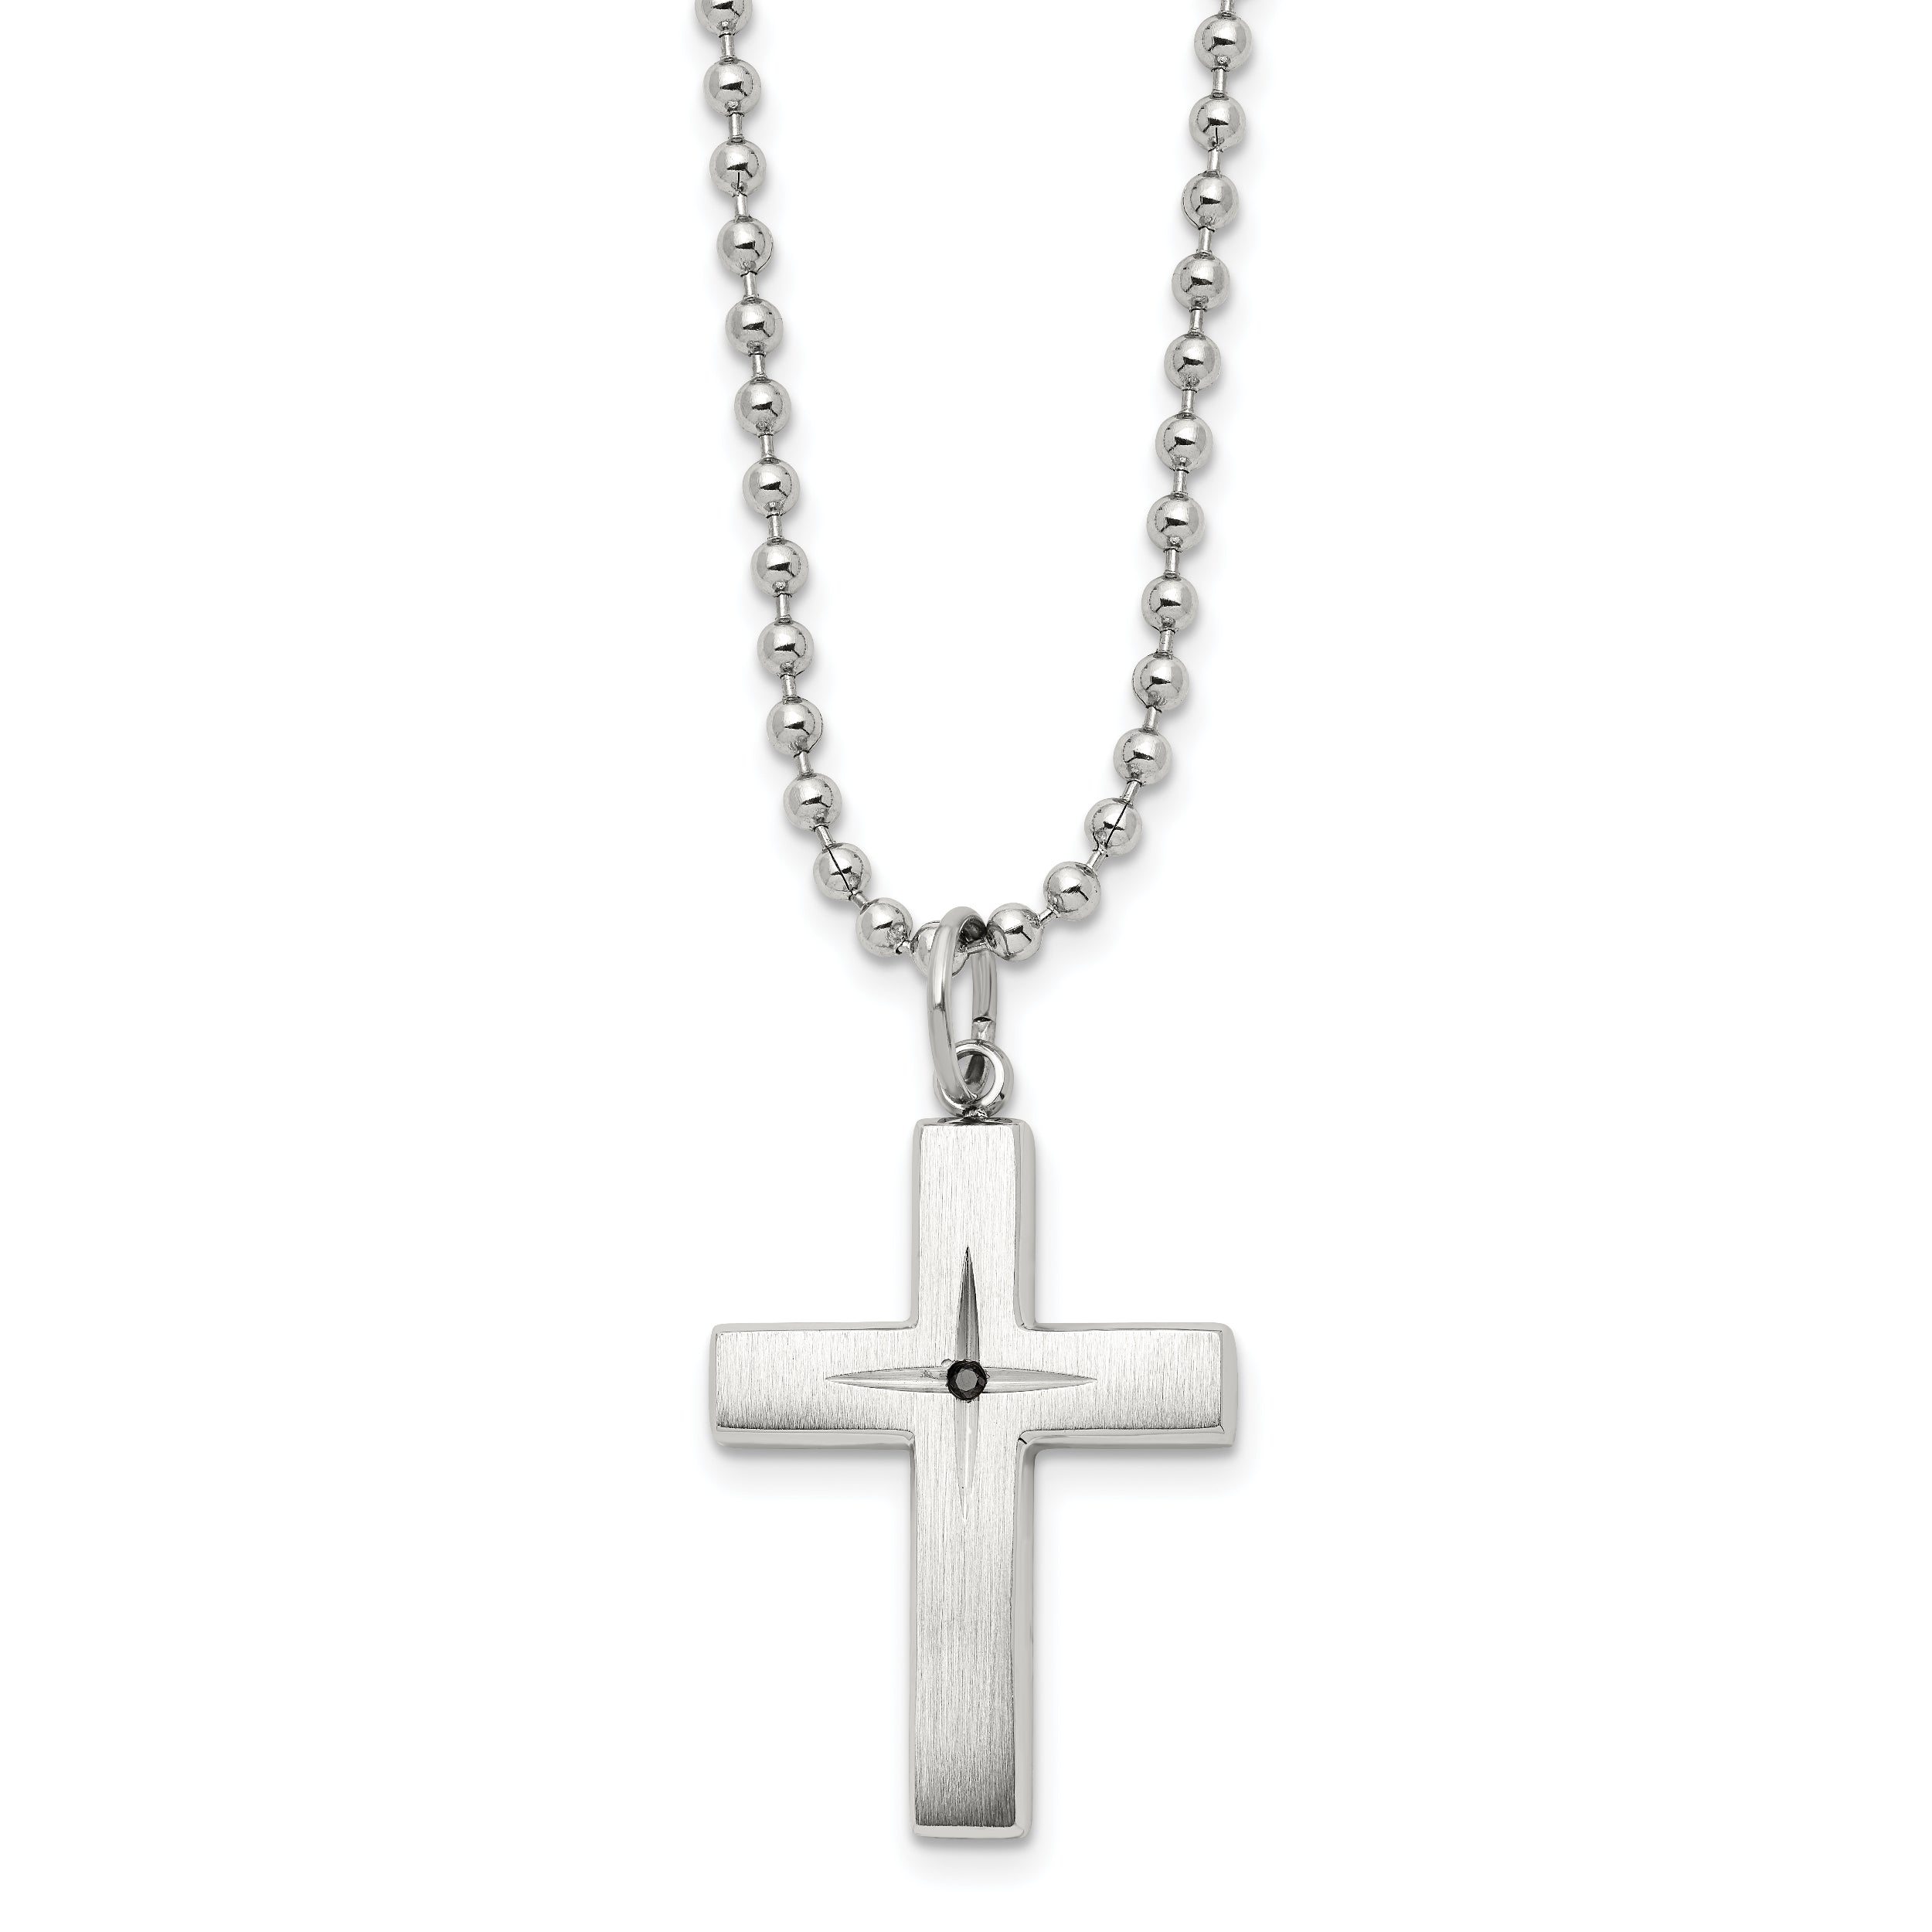 Chisel Stainless Steel Brushed and Polished 0.015 carat Black Diamond Cross Pendant on a 24 inch Ball Chain Necklace